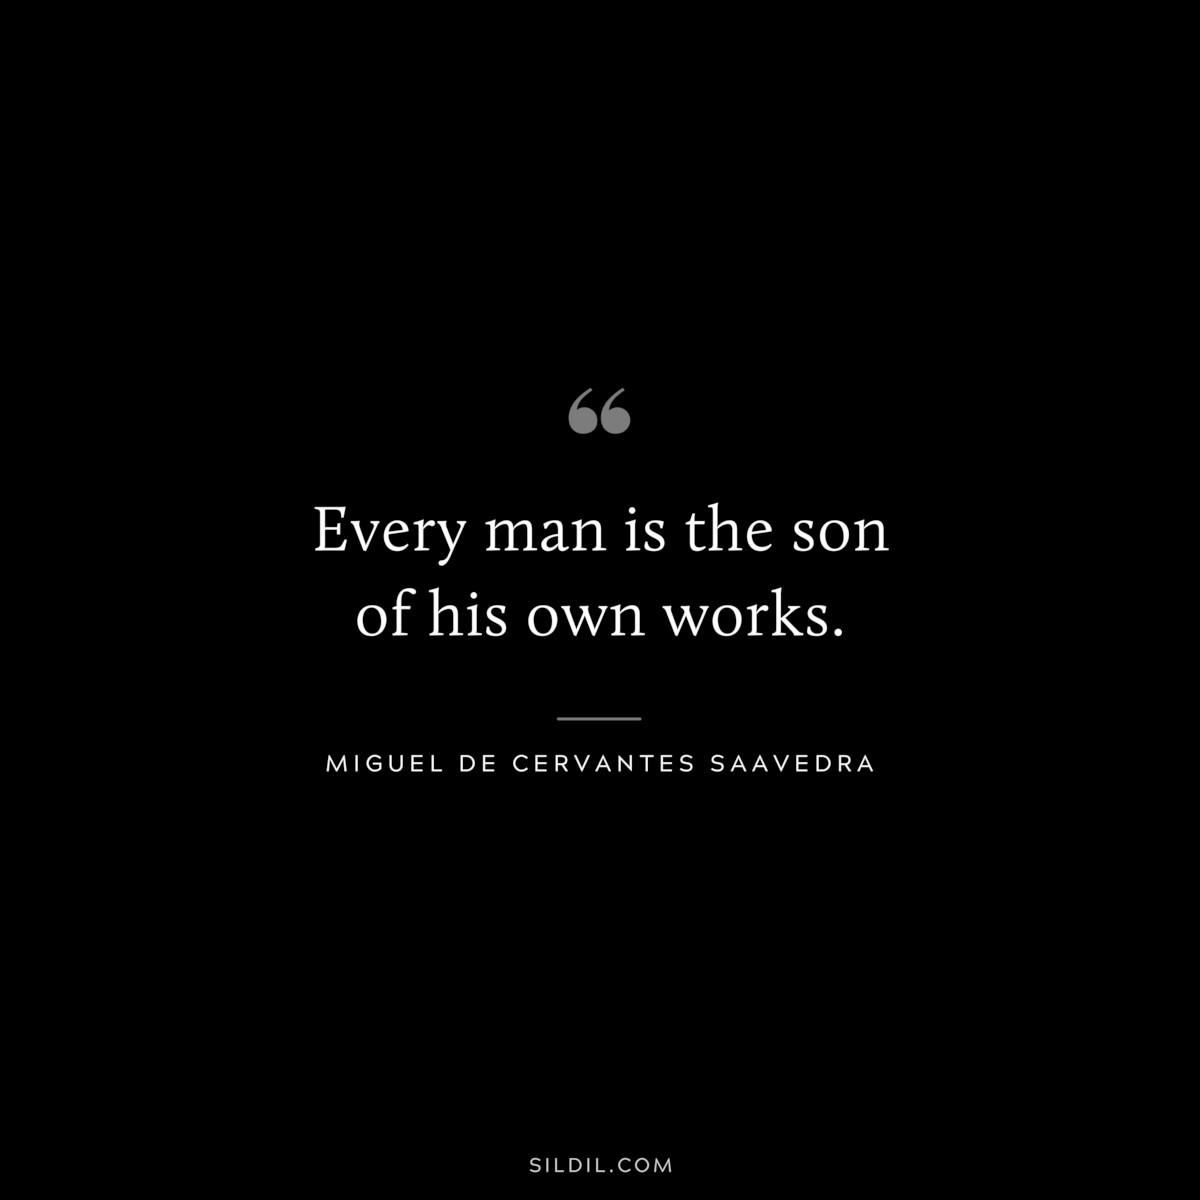 Every man is the son of his own works. ― Miguel de Cervantes Saavedra